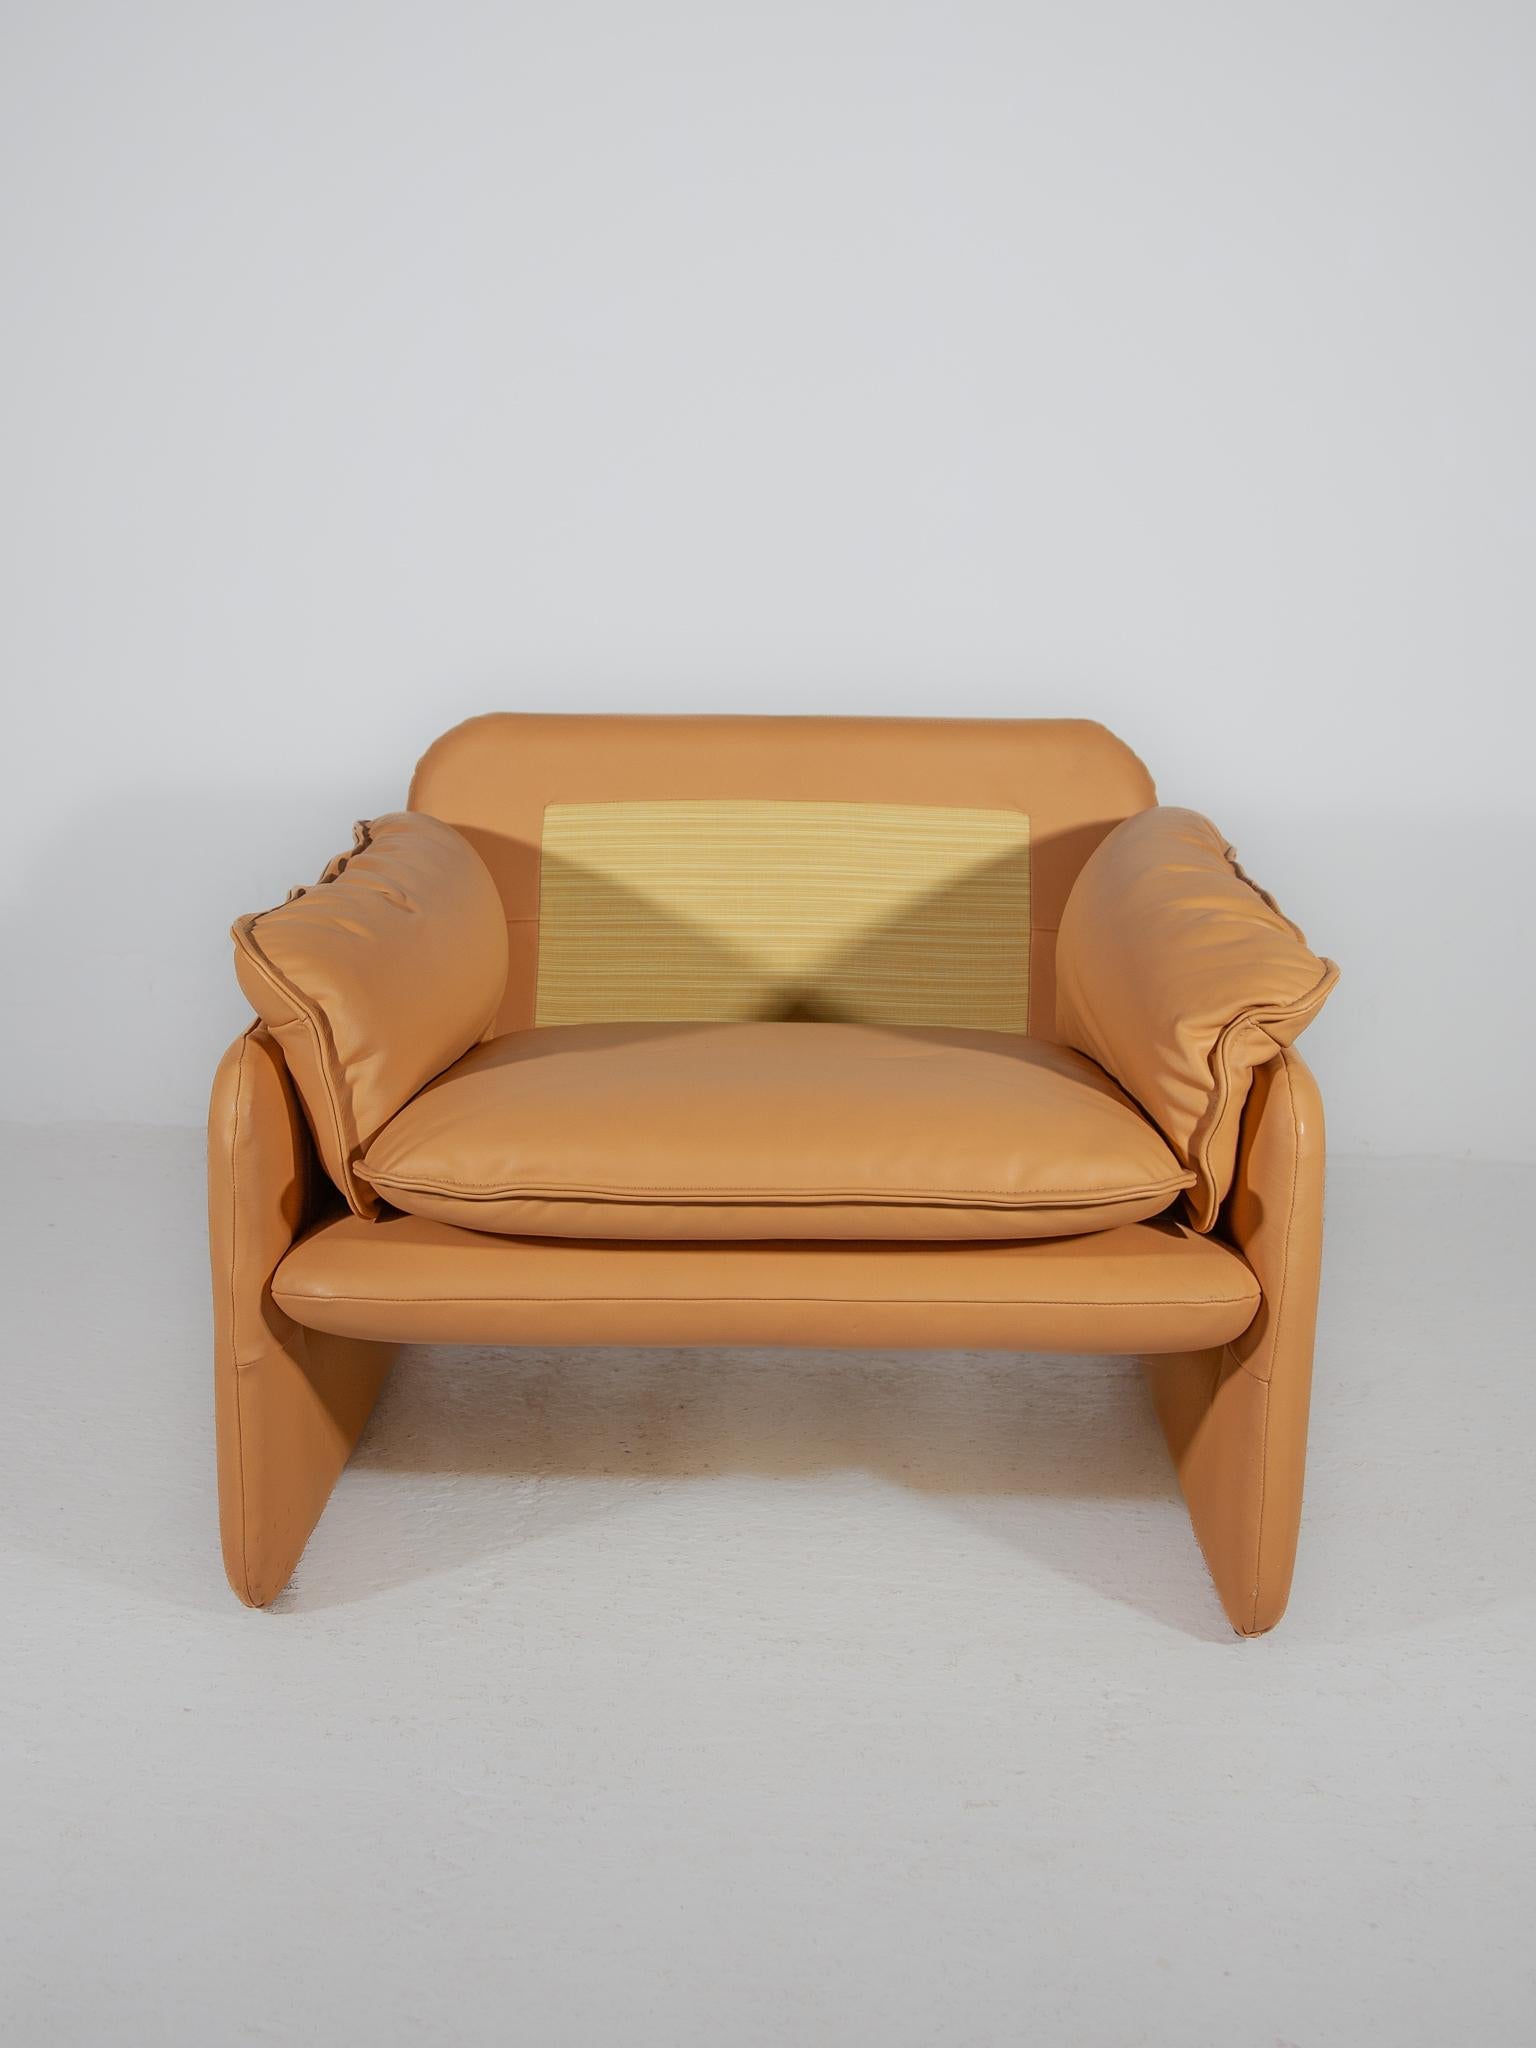 Late 20th Century Set of 2 Ds-61 Armchairs Camel Leather designed by De Sede, 1970s For Sale